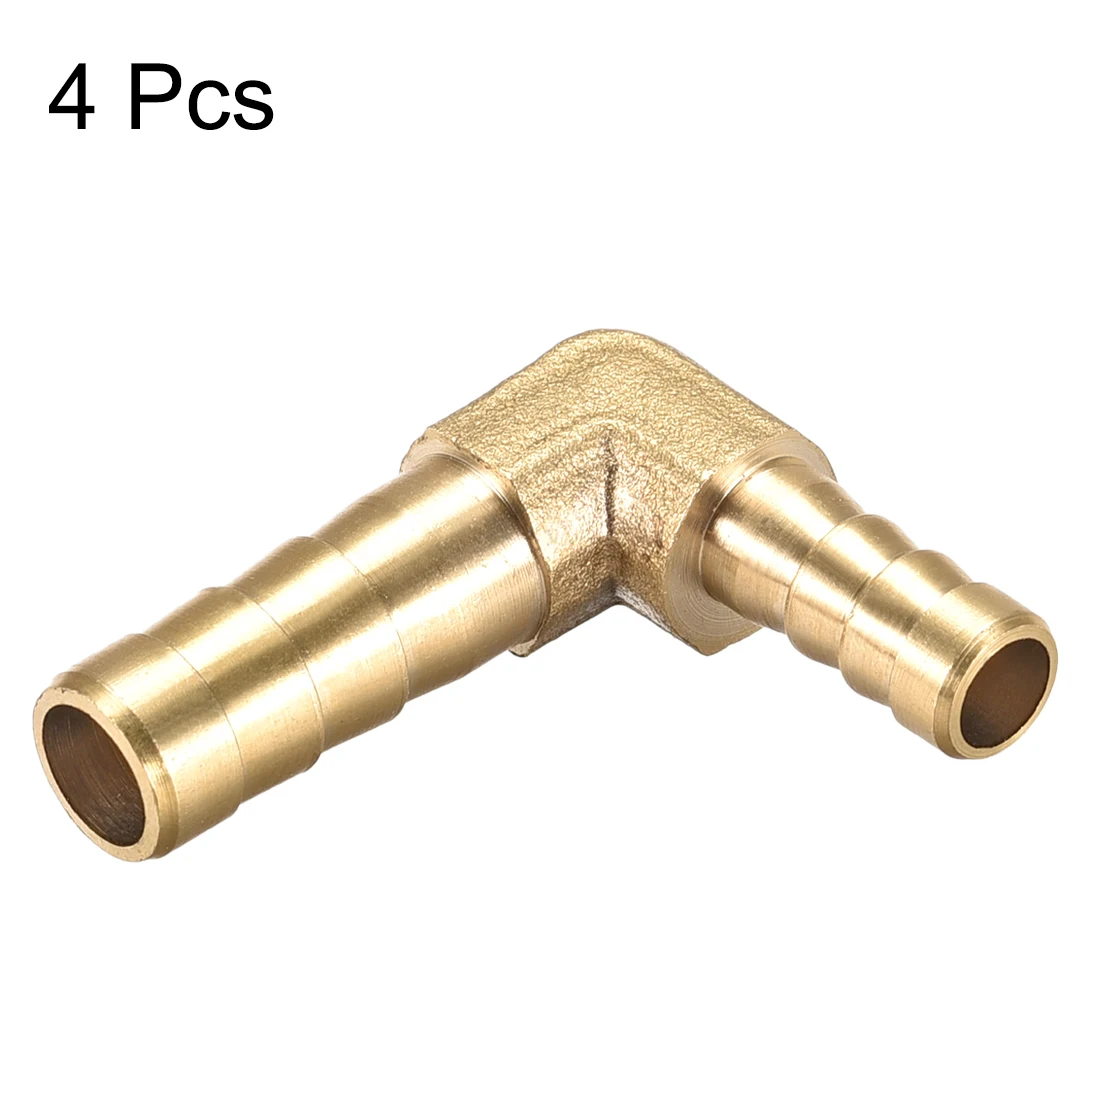 

uxcell 4pcs 8mm To 6mm Barb Brass Hose Fitting 90 Degree Elbow Pipe Connector Coupler Tubing Adapter for air, water, fuel